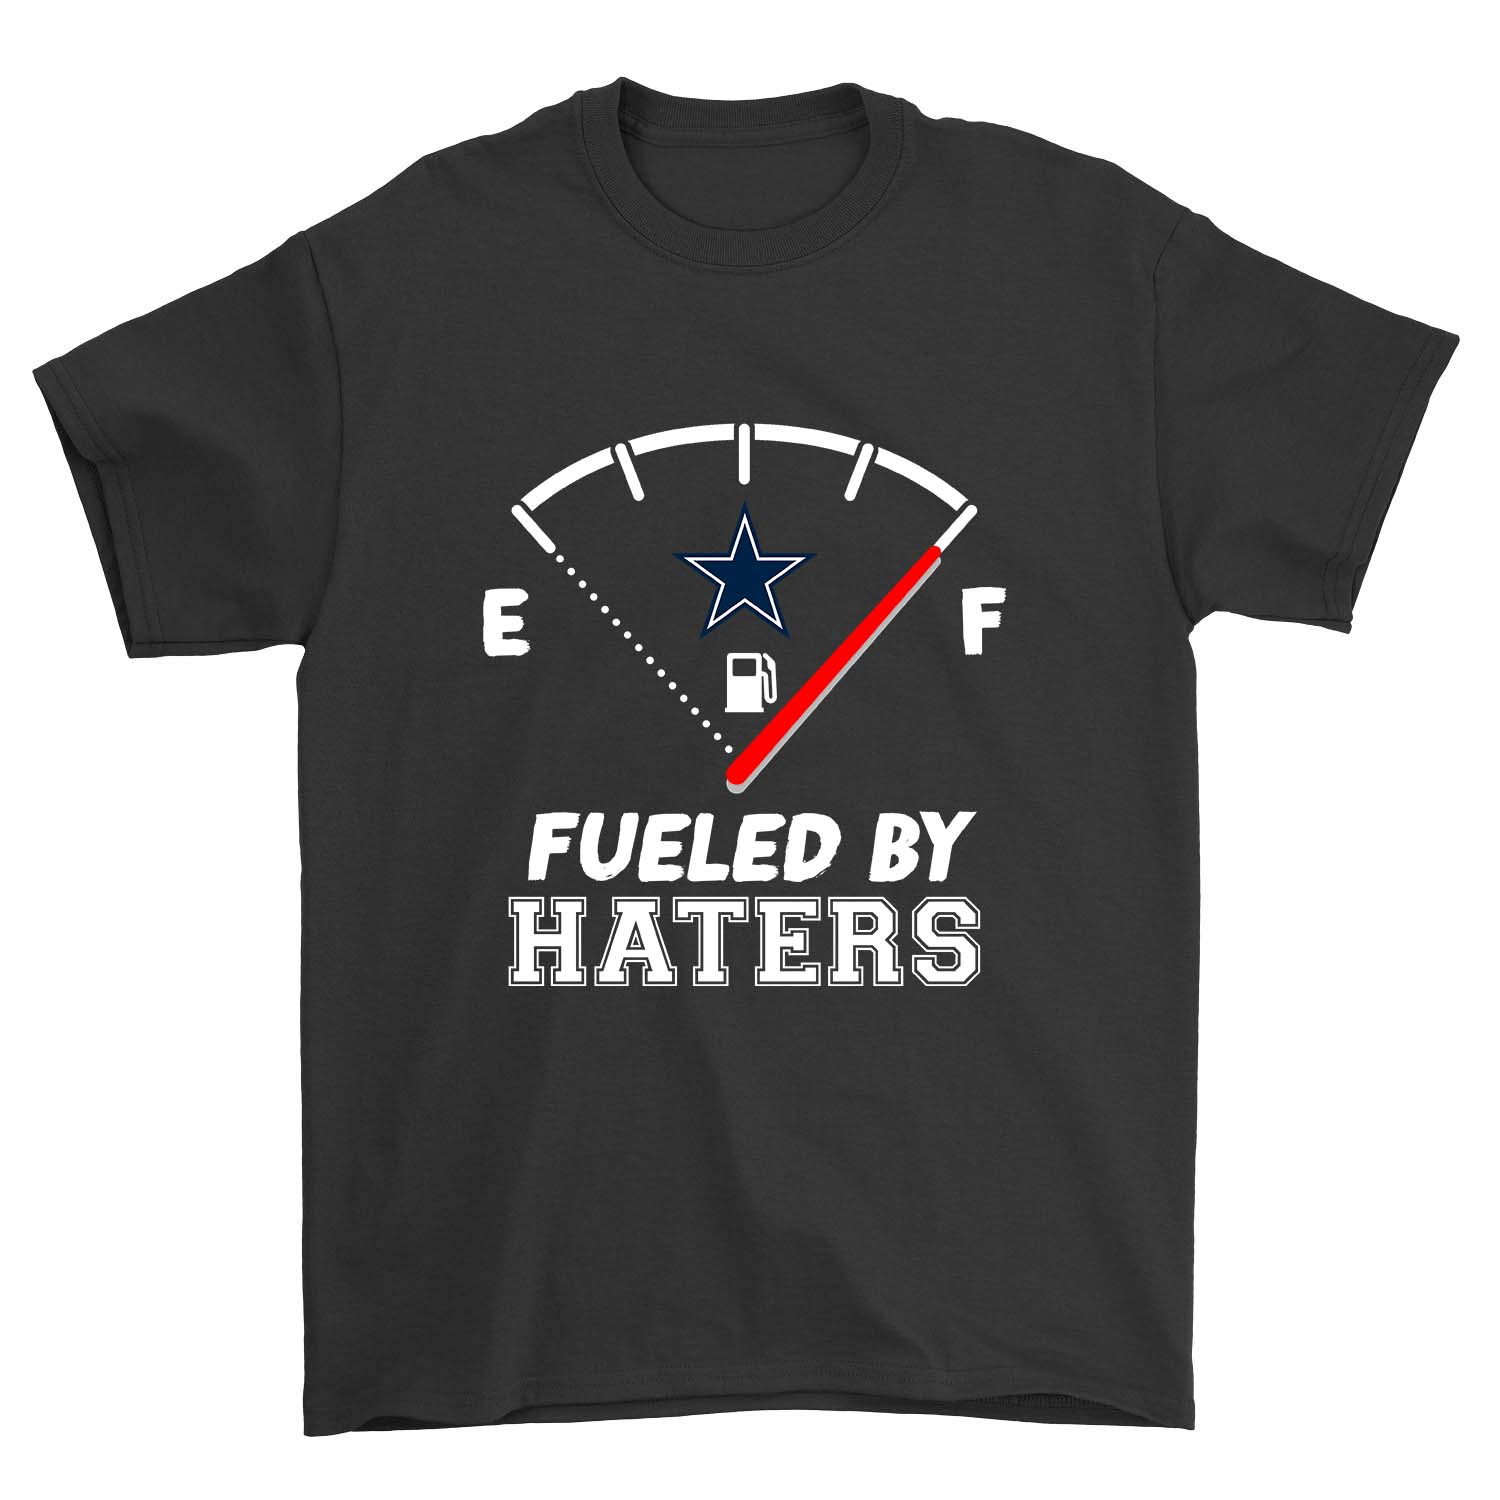 Nfl Dallas Cowboys Fueled By Haters Dallas Cowboys Tank Top Plus Size Up To 5xl